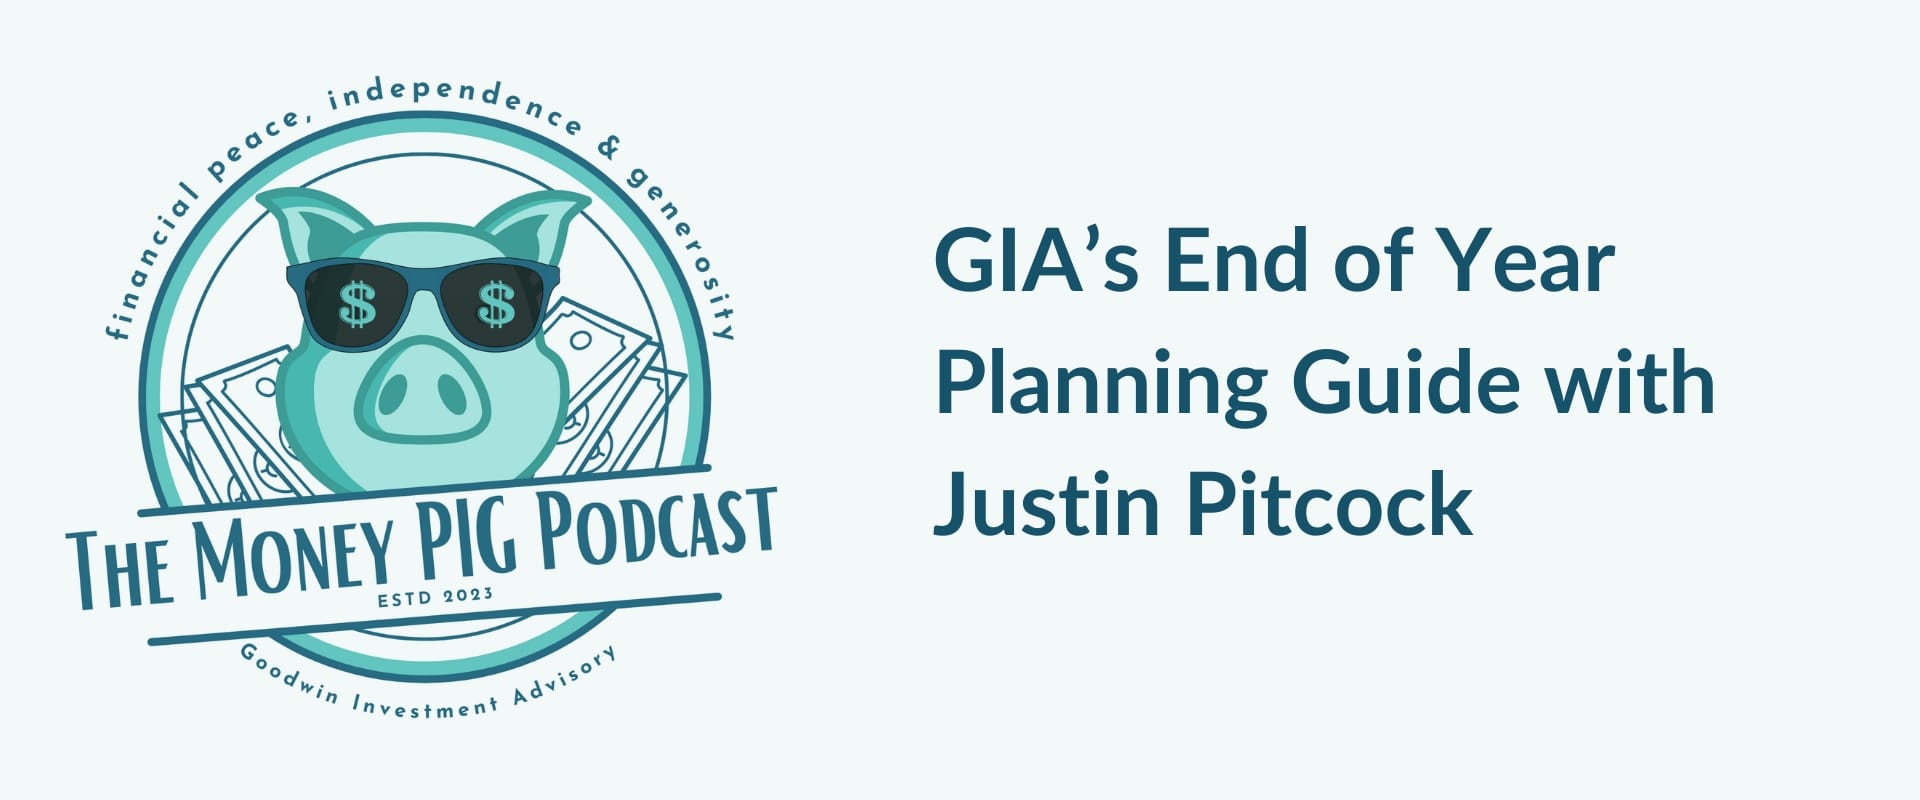 GIA’s End of Year Planning Guide with Justin Pitcock